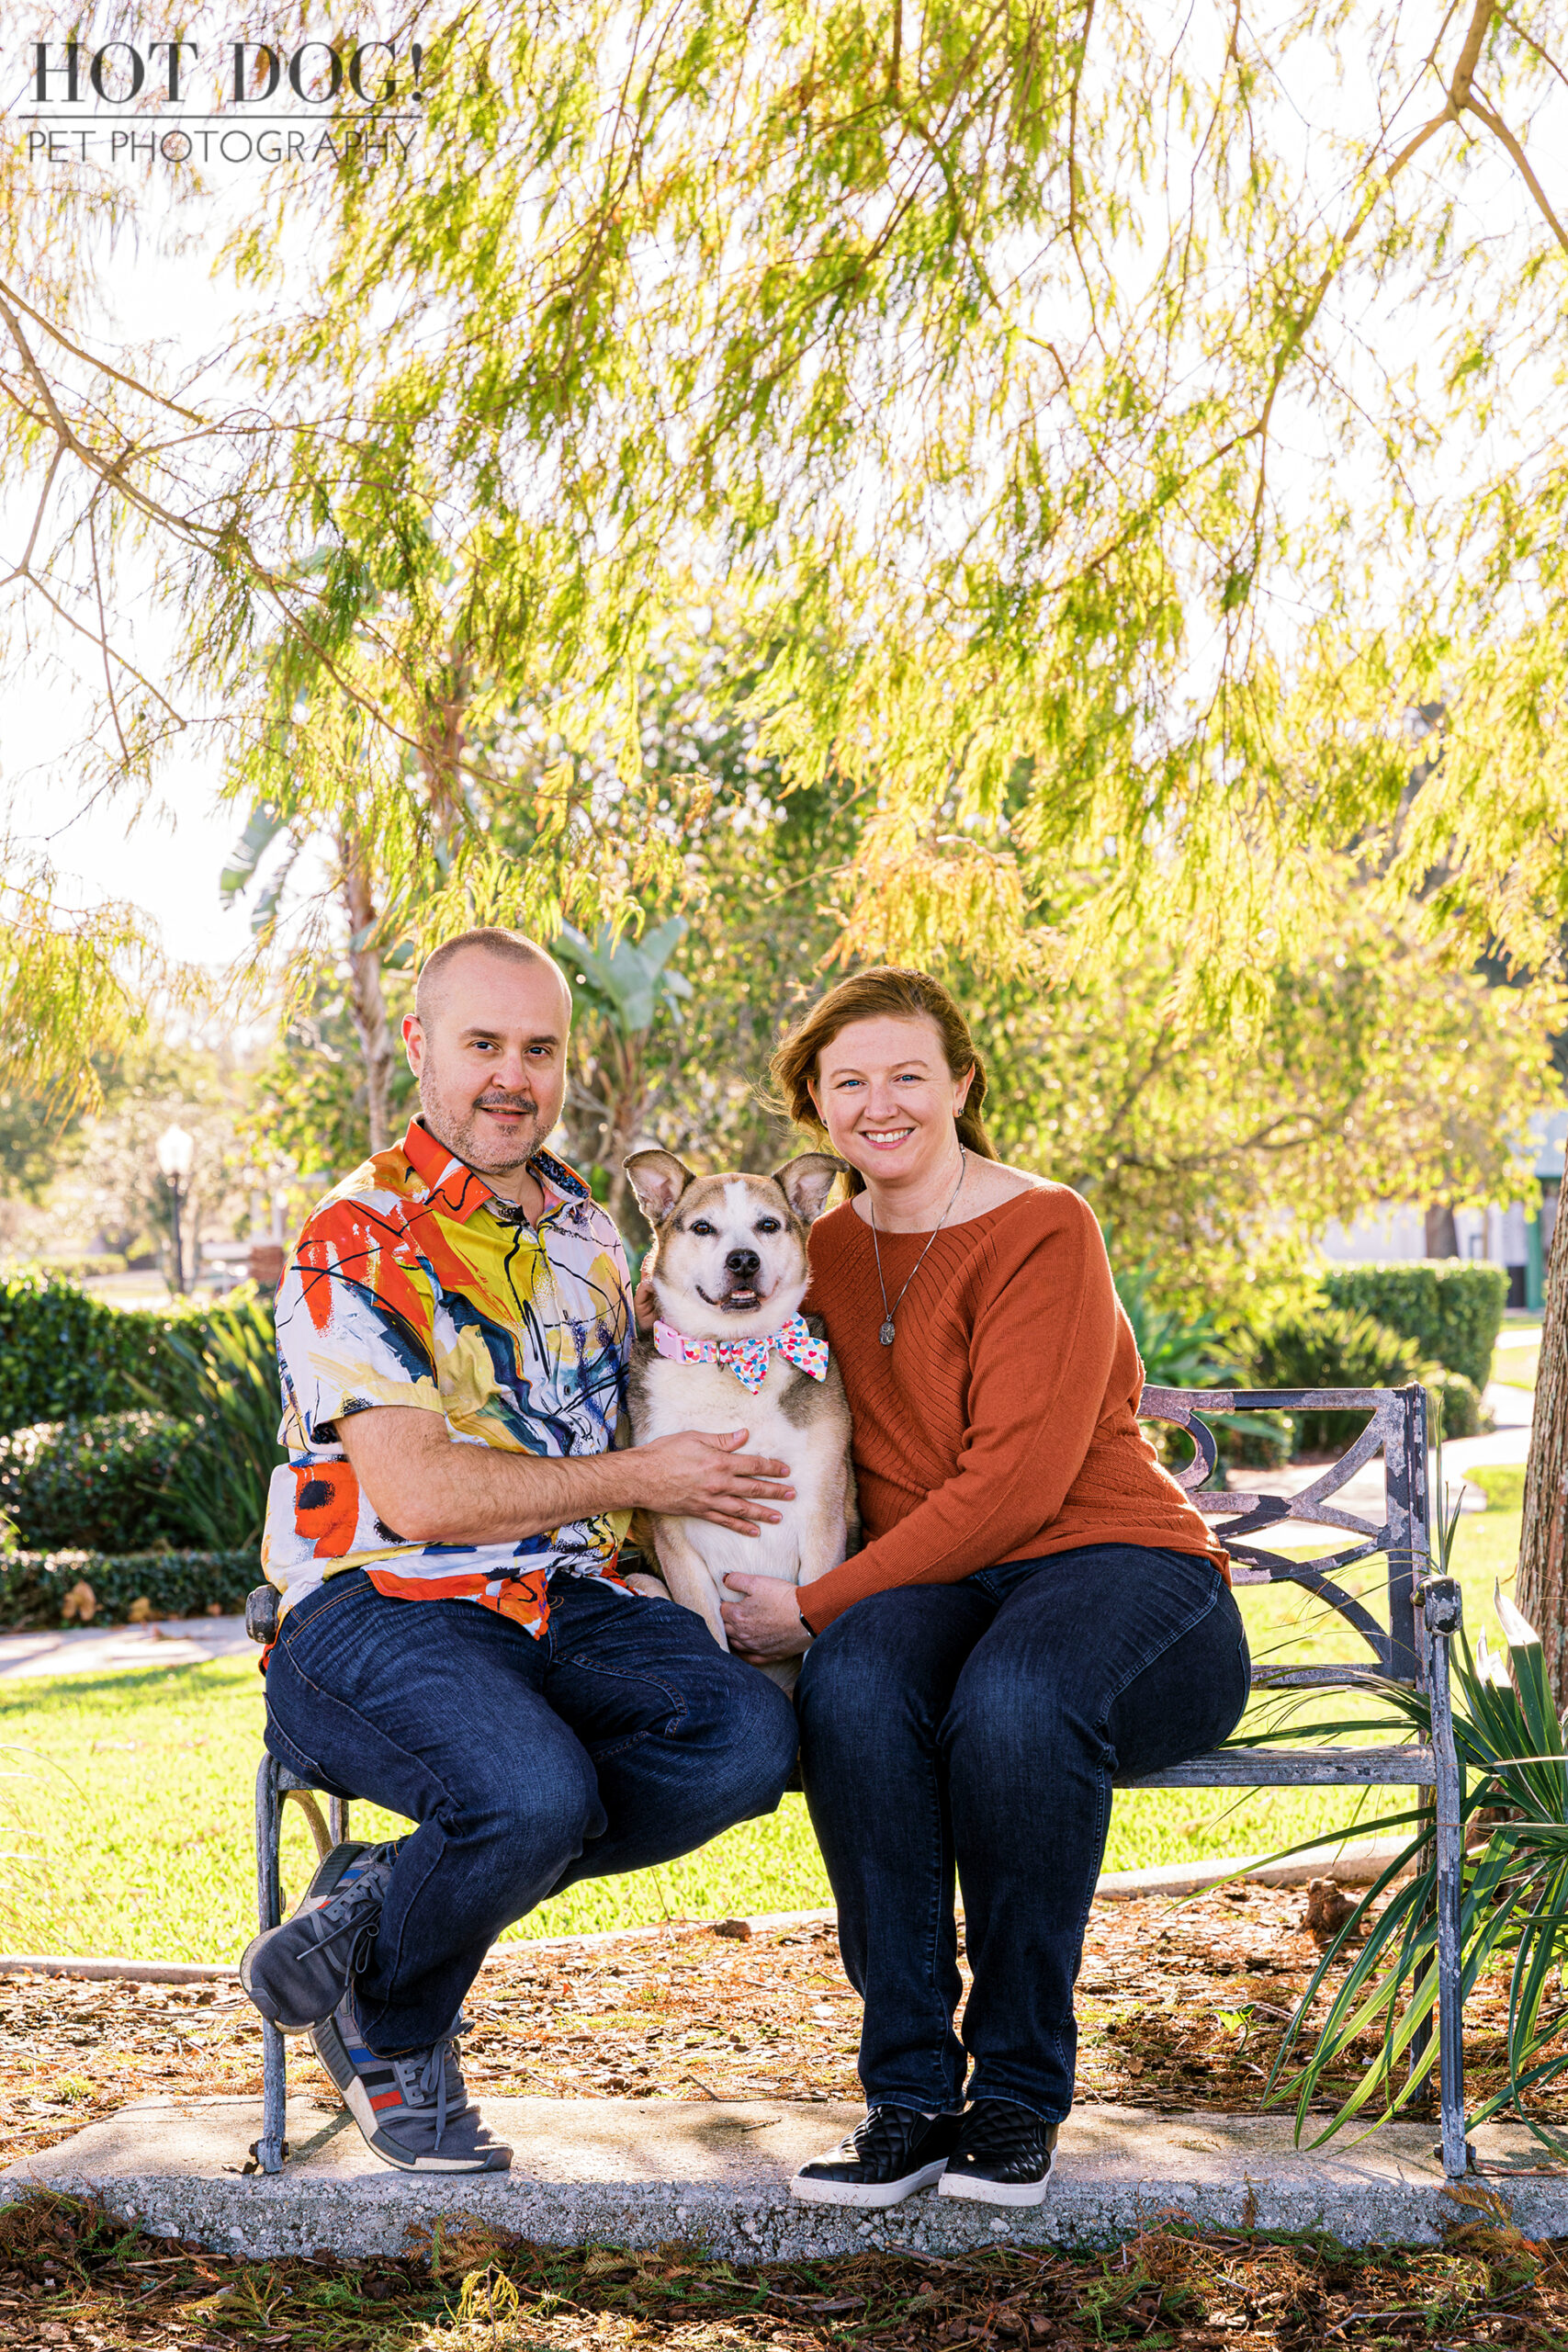 Hot Dog! Pet Photography captures the love and bond between Zoe the Aussie mix and her mom and dad in this professional pet photo session.